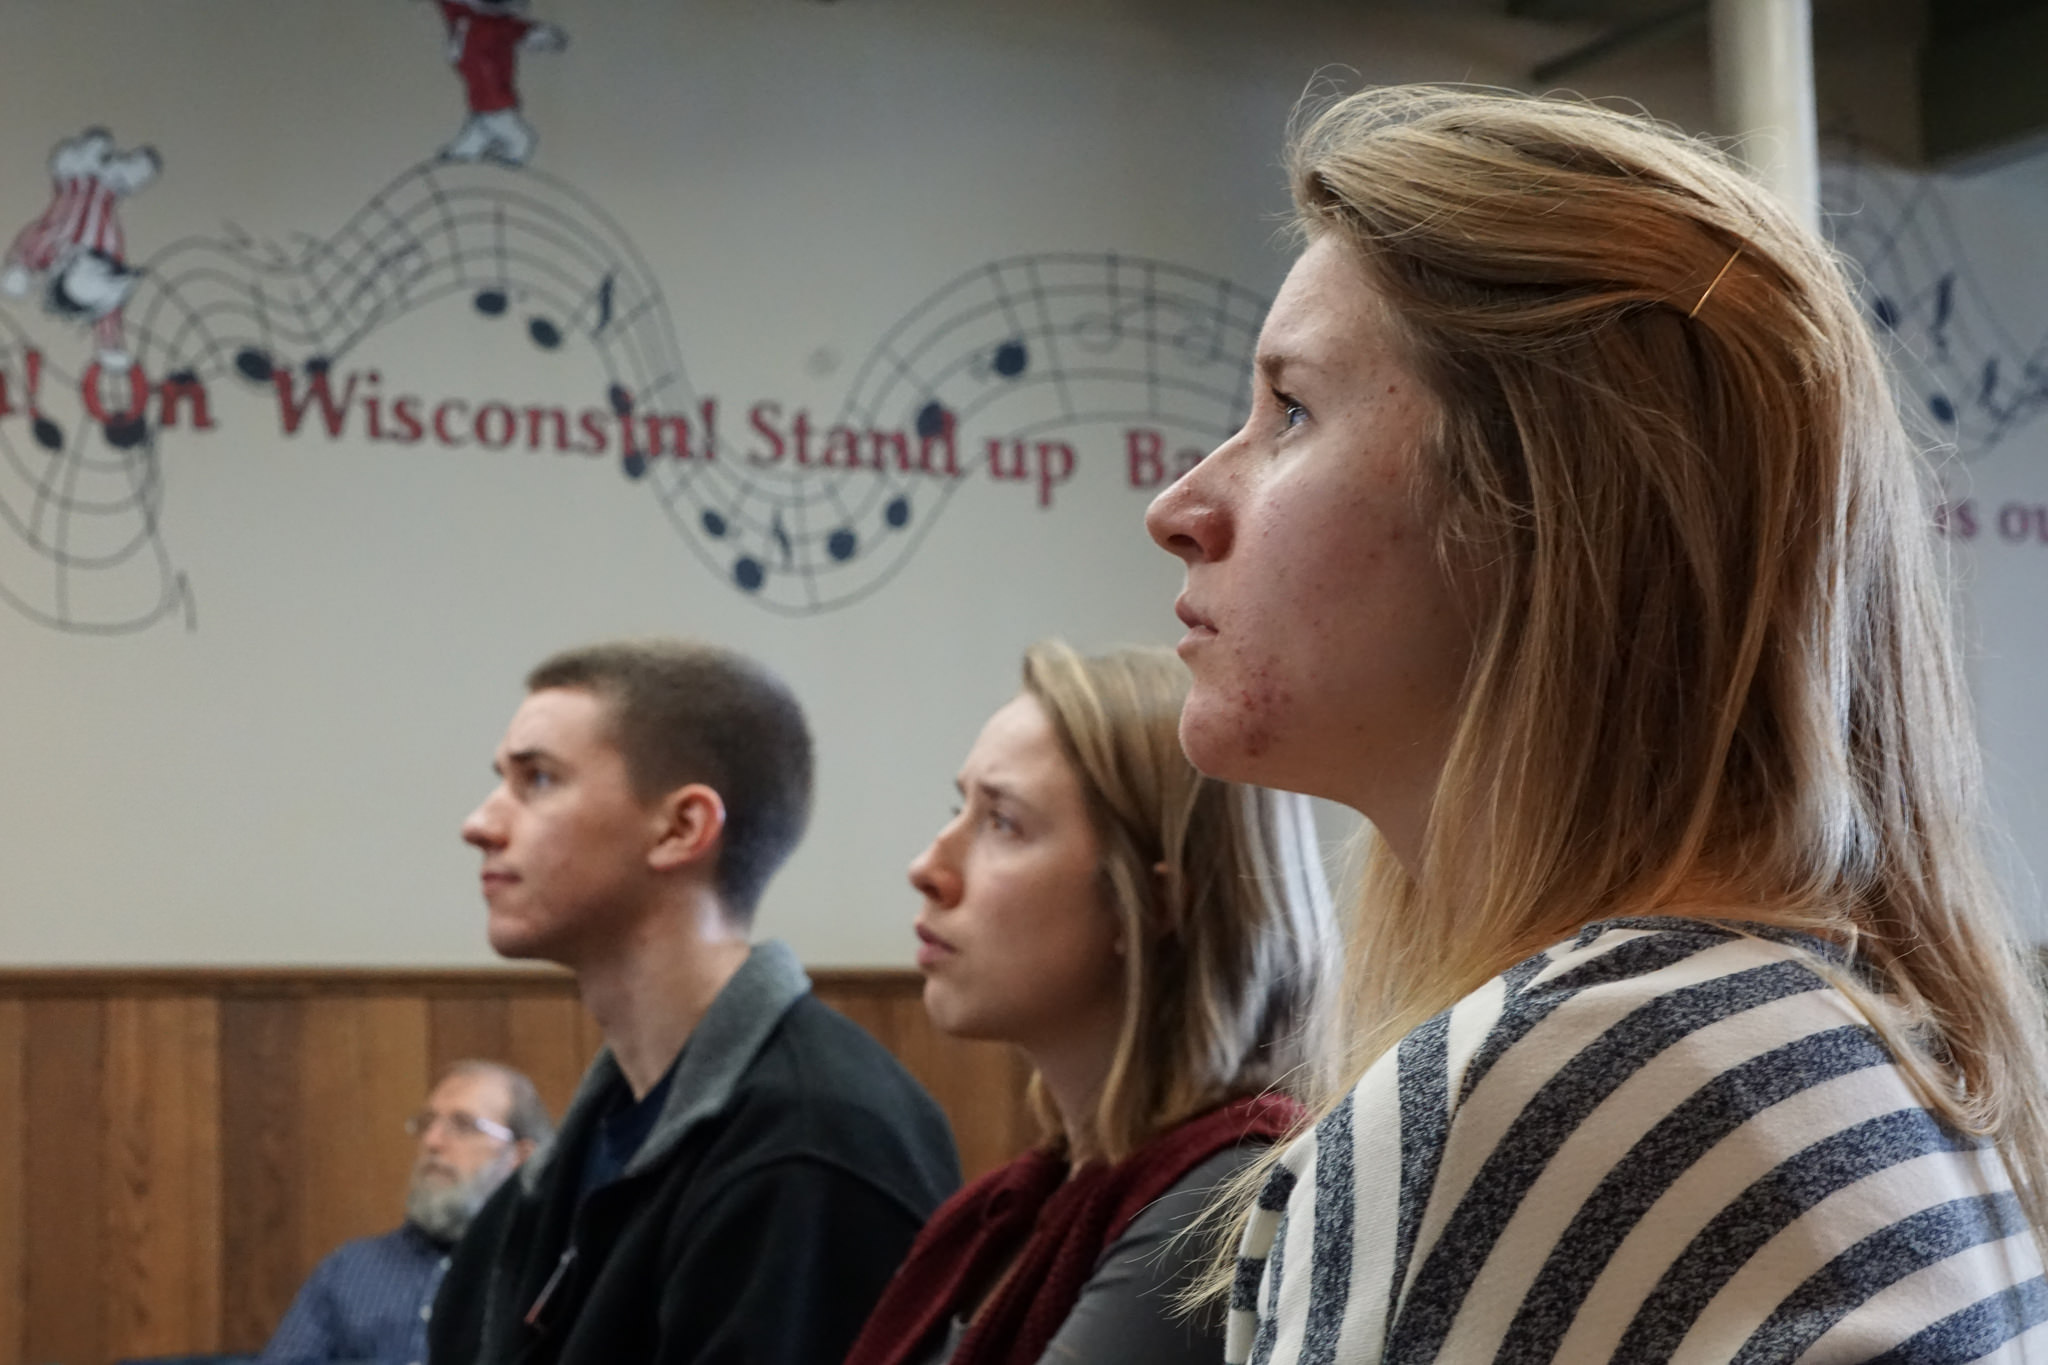 Students at University of Wisconsin-Madison watch the closing ceremony of their teach-in after a weekend of workshops, discussions, and debates about the Next System. (Photo: Michelle Stearn)